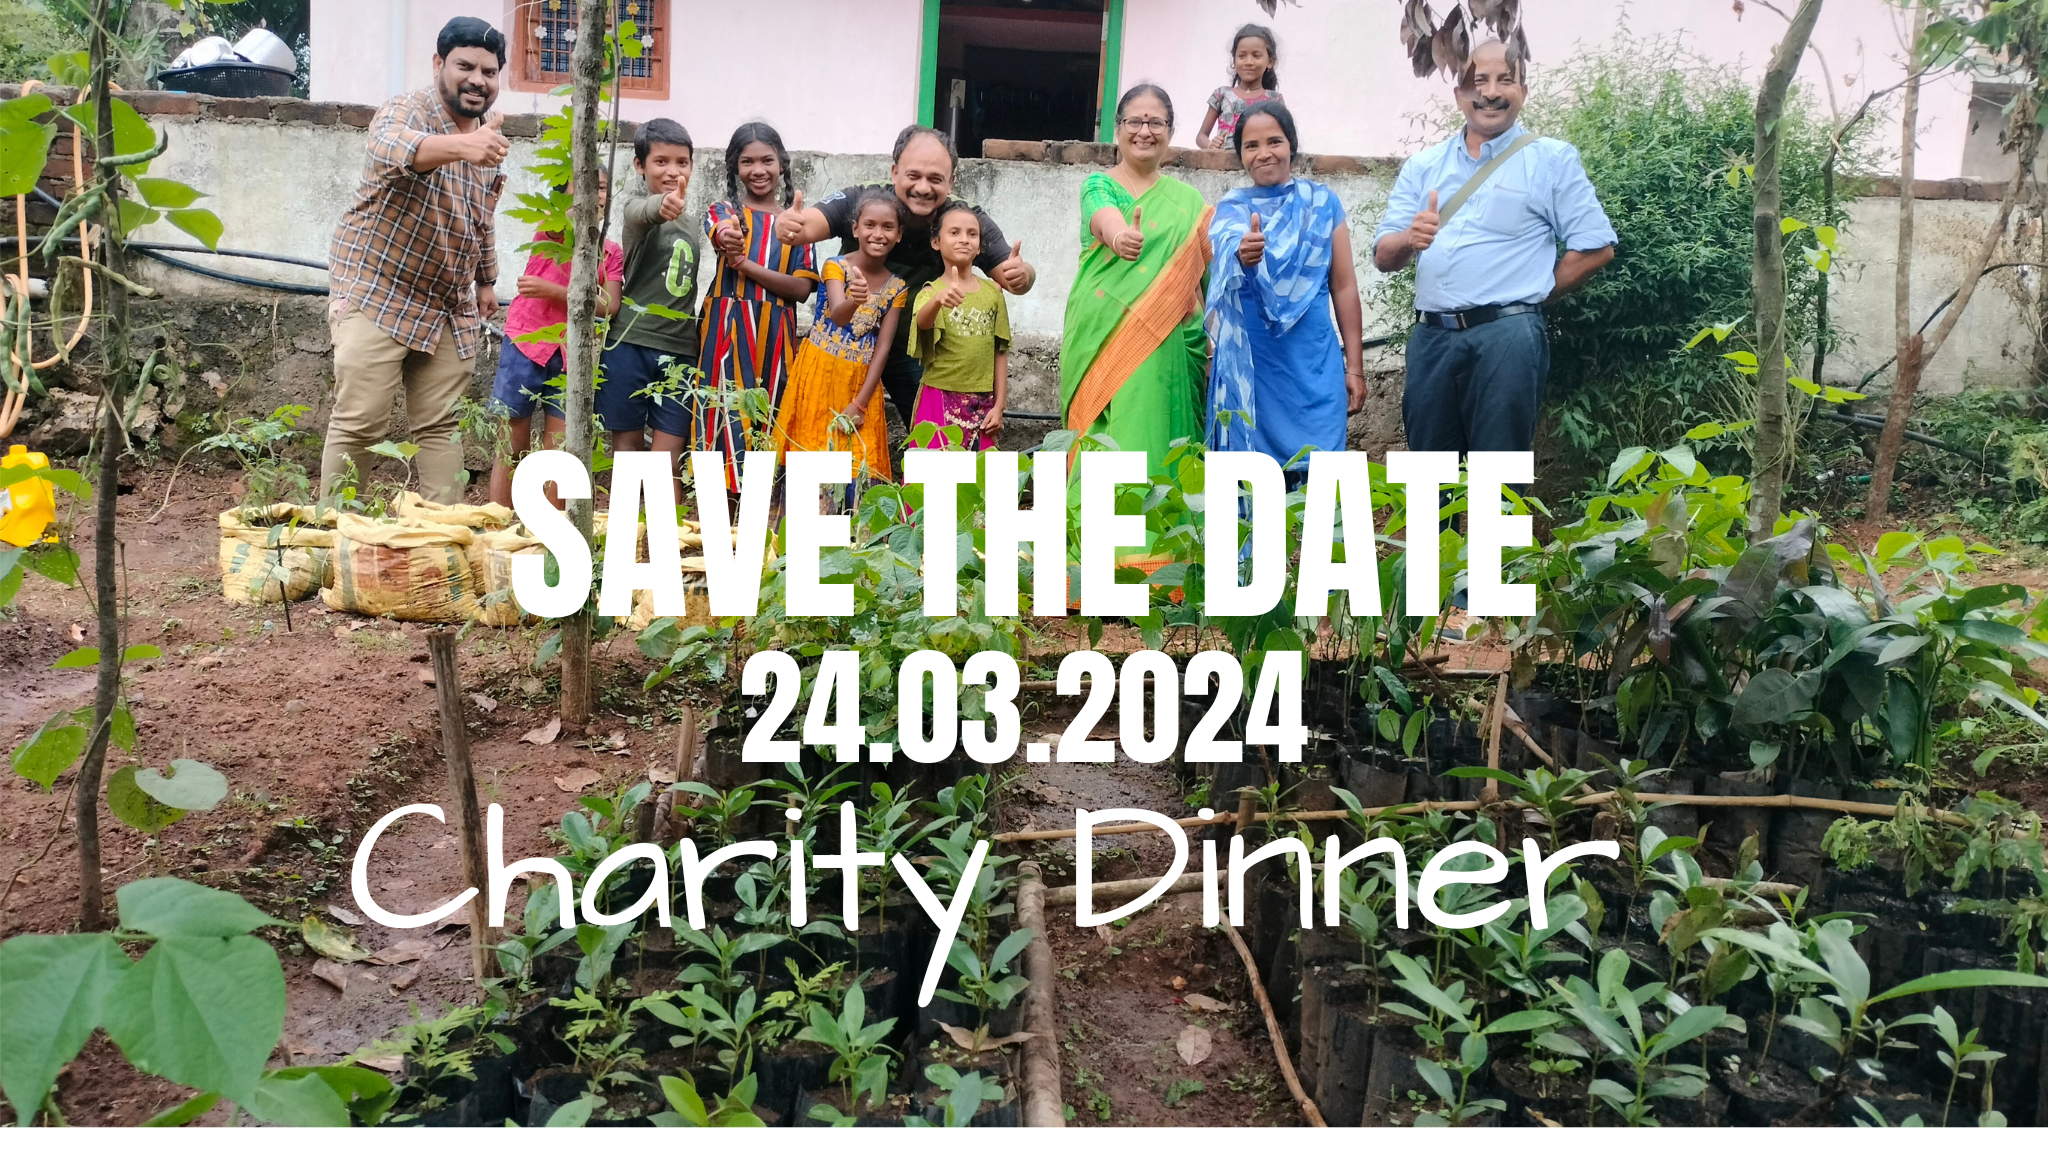 Dignity asbl – Charity dinner - 24.03.2024